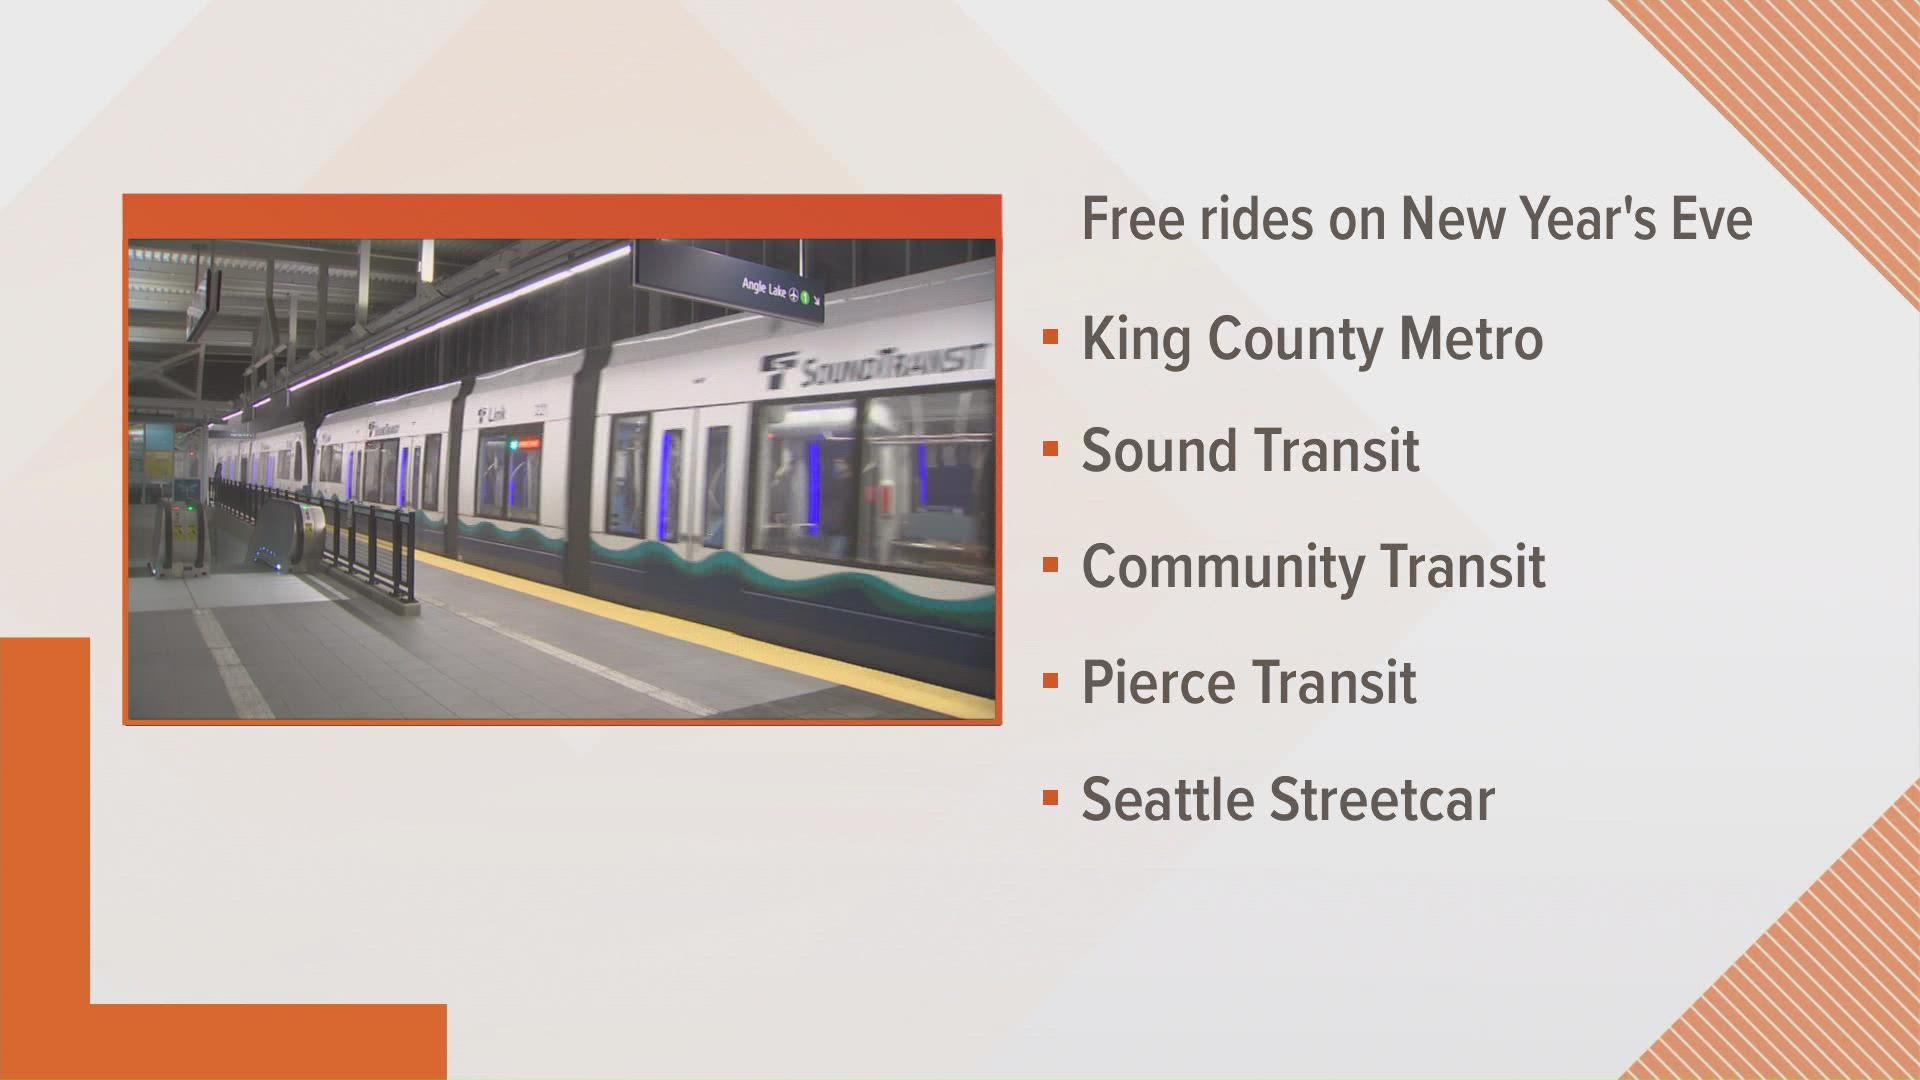 Celebrating 2022 away from home? Be safe with free transit on New Year's Eve around the Puget Sound region.